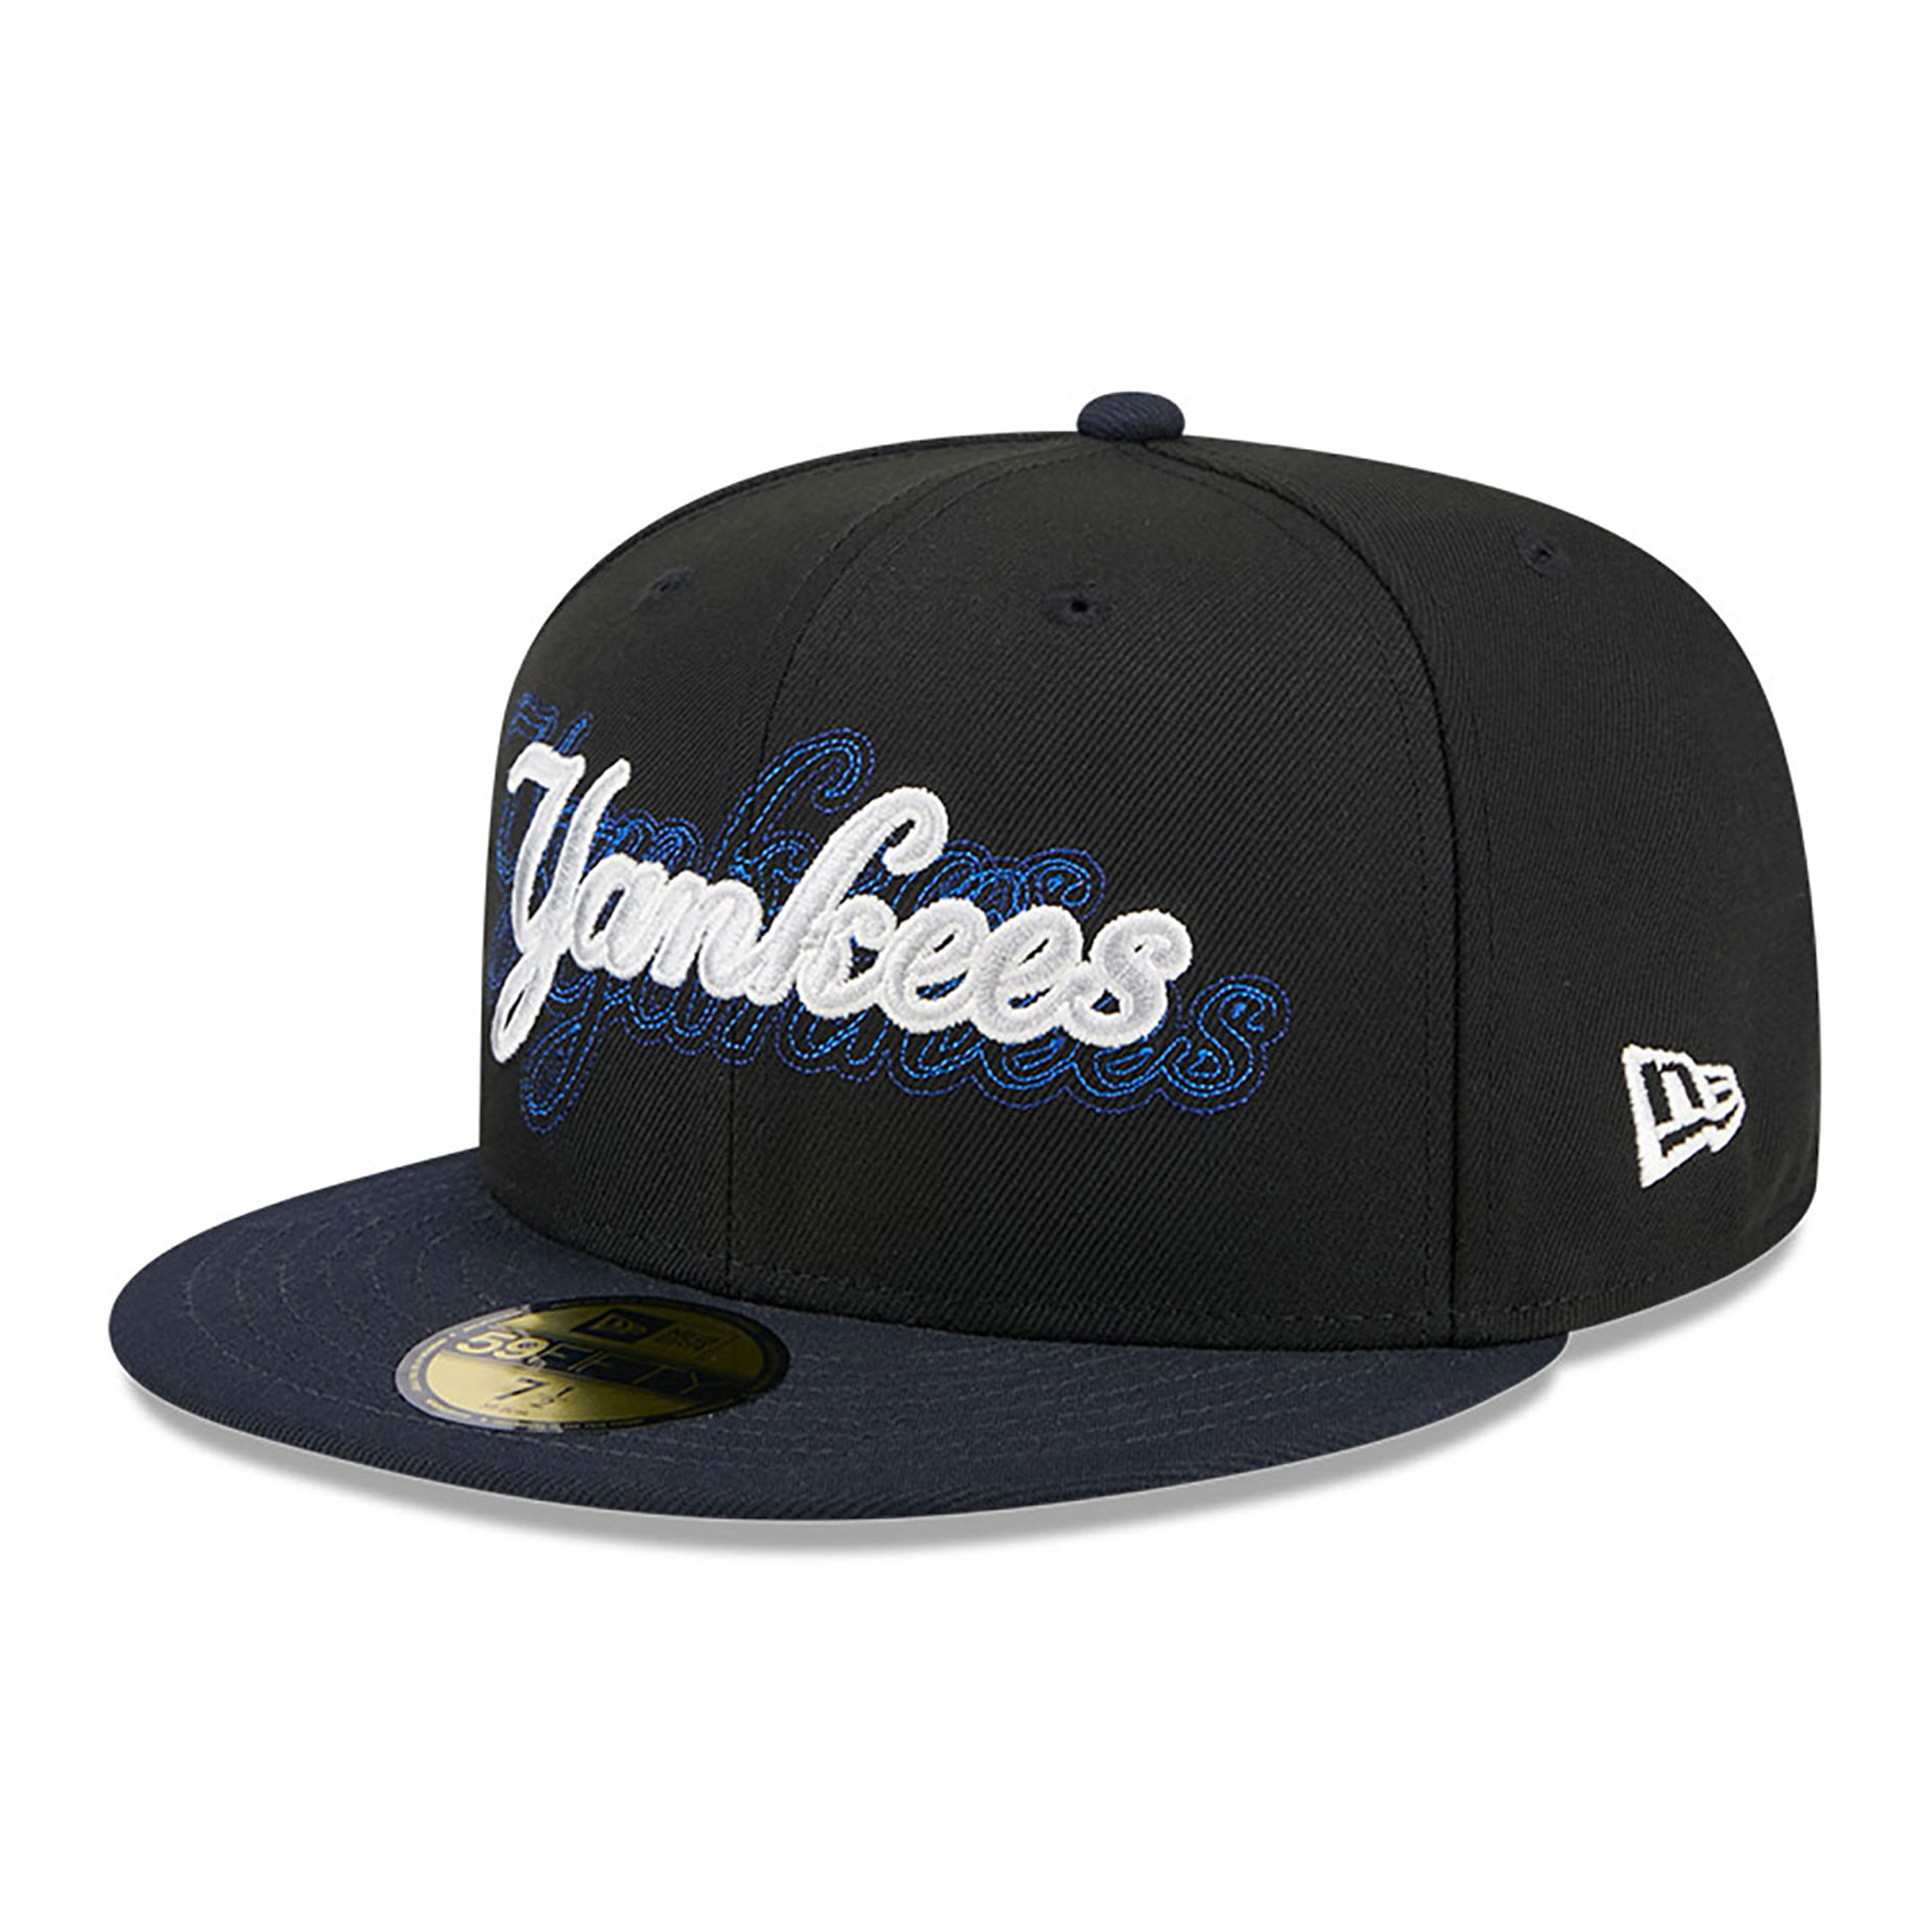 New York Yankees Shadow Stitch Black 59FIFTY Fitted Cap